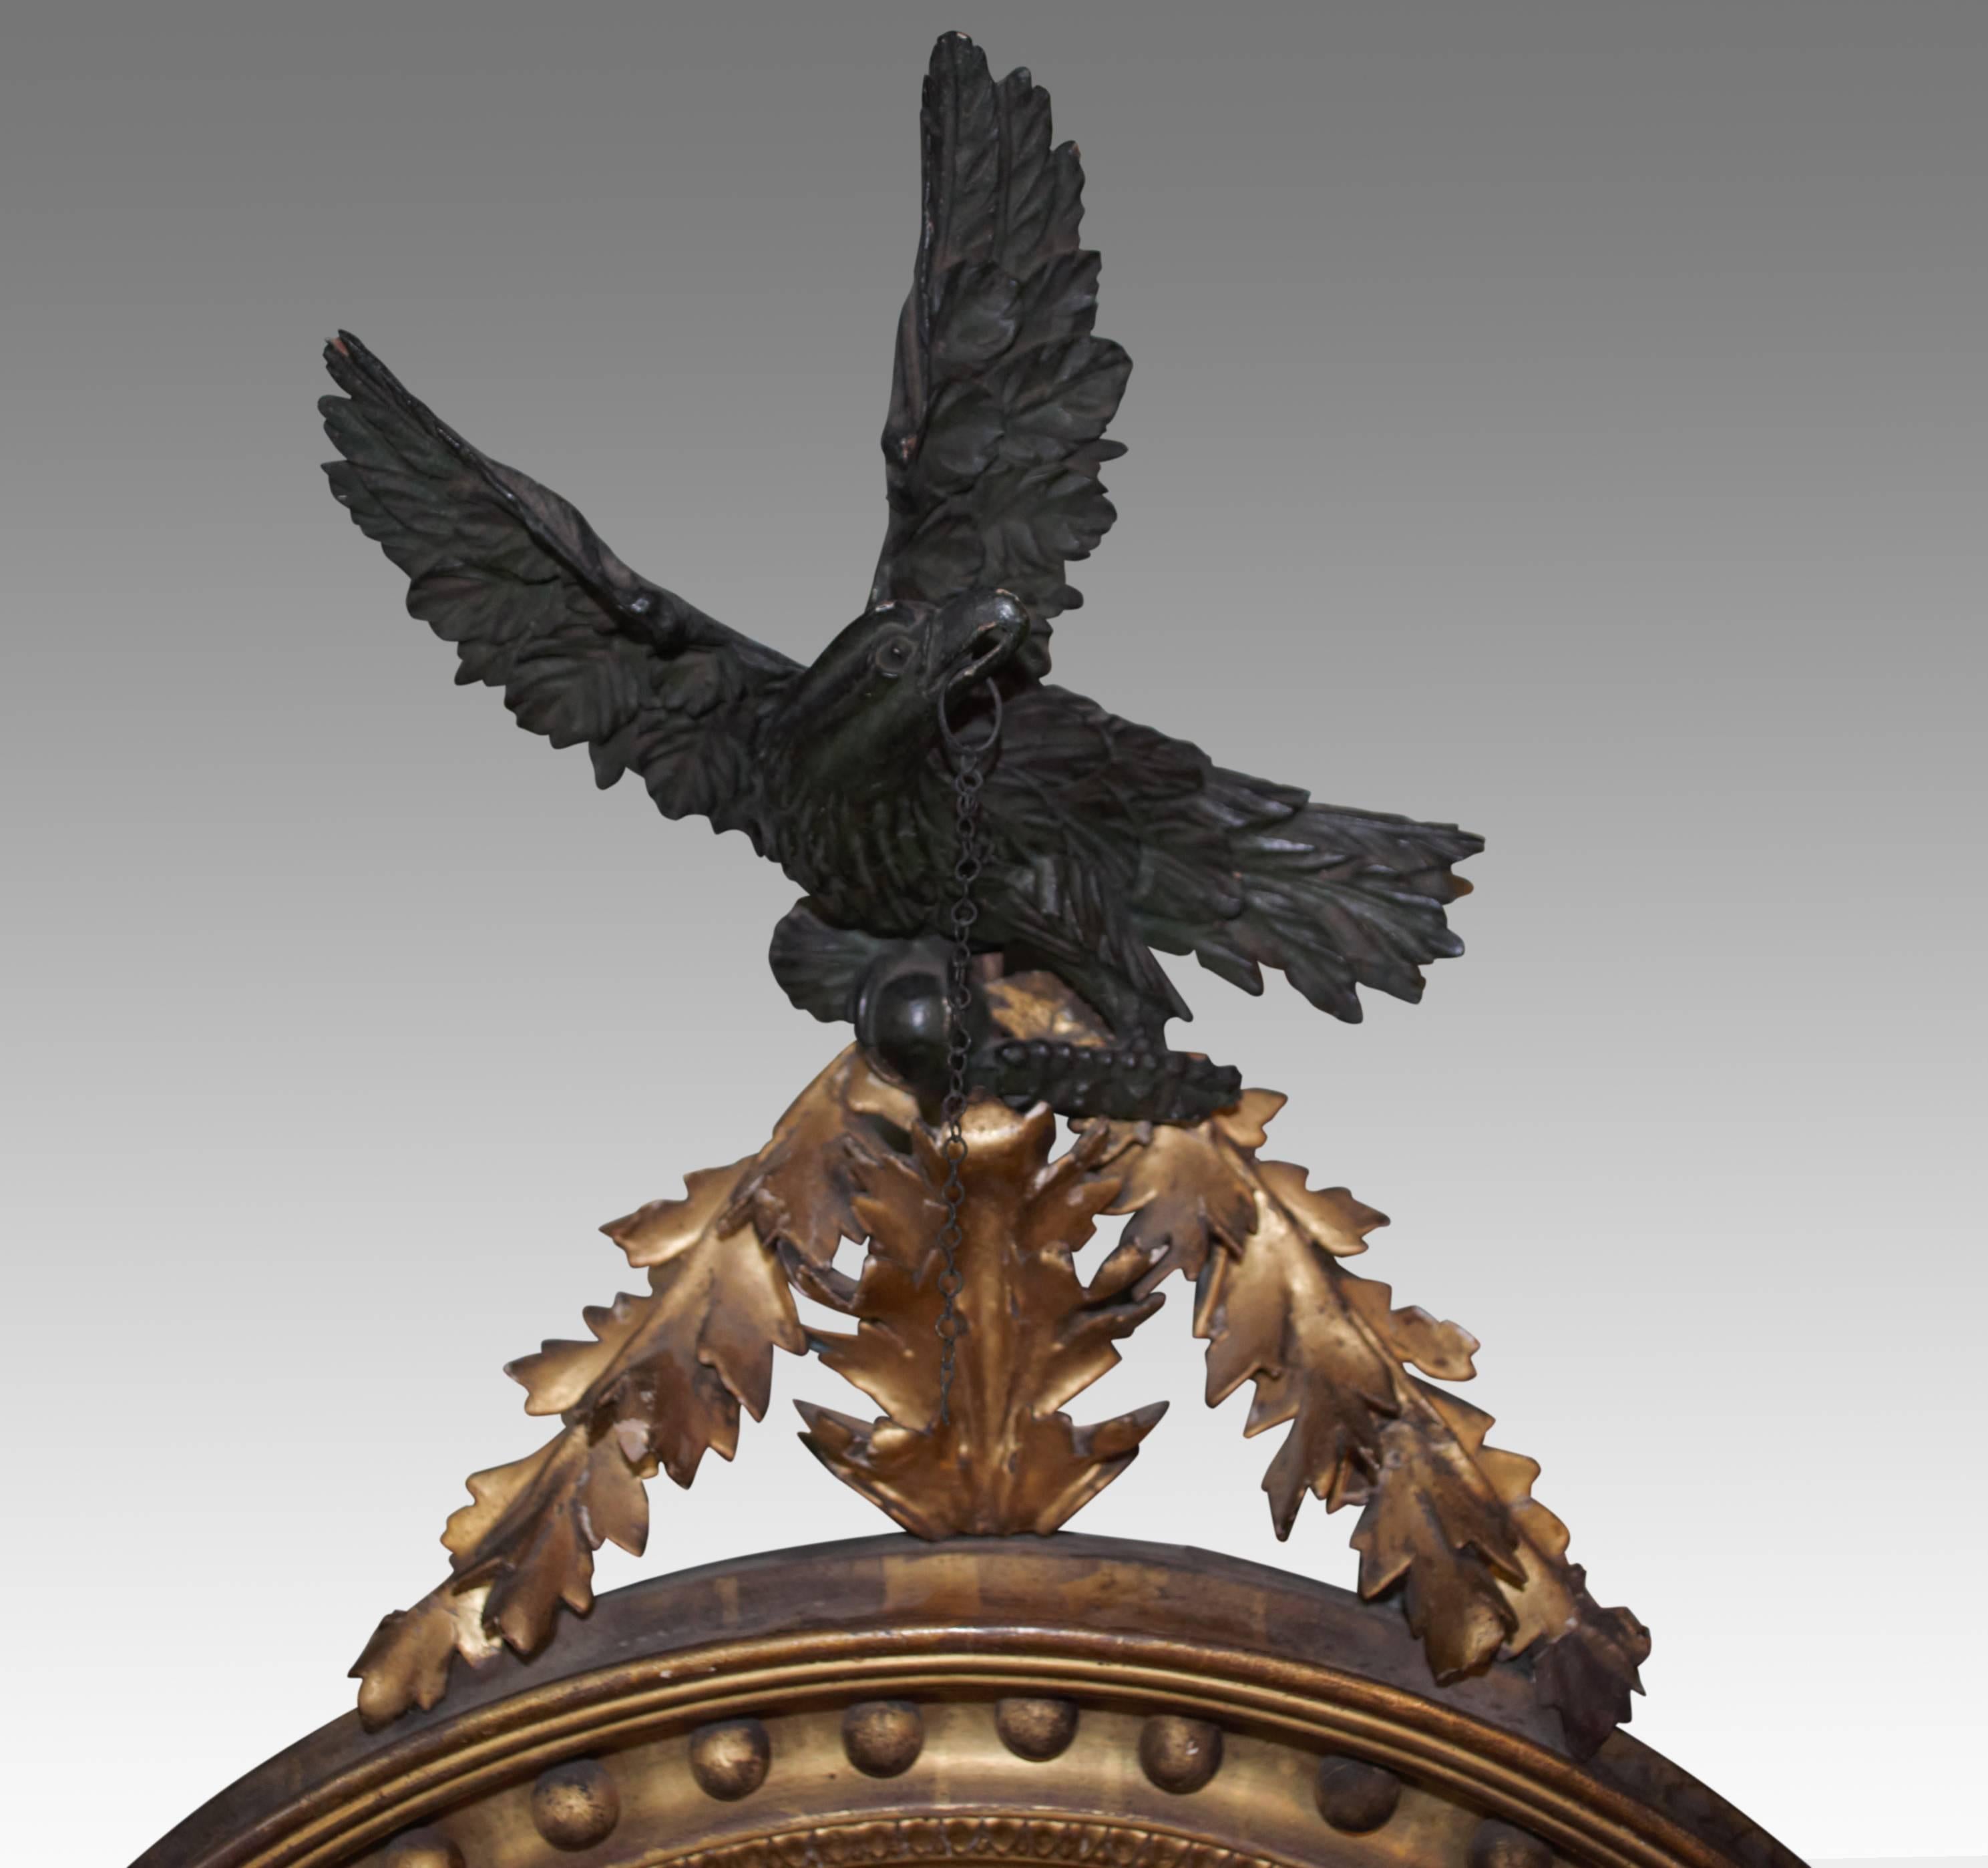 A fine Regency period giltwood convex mirror with carved ebonised eagle surmount, perched on a raised leafy pediment. The scooped frame set with gilt balls, with half sunburst pelmet below.